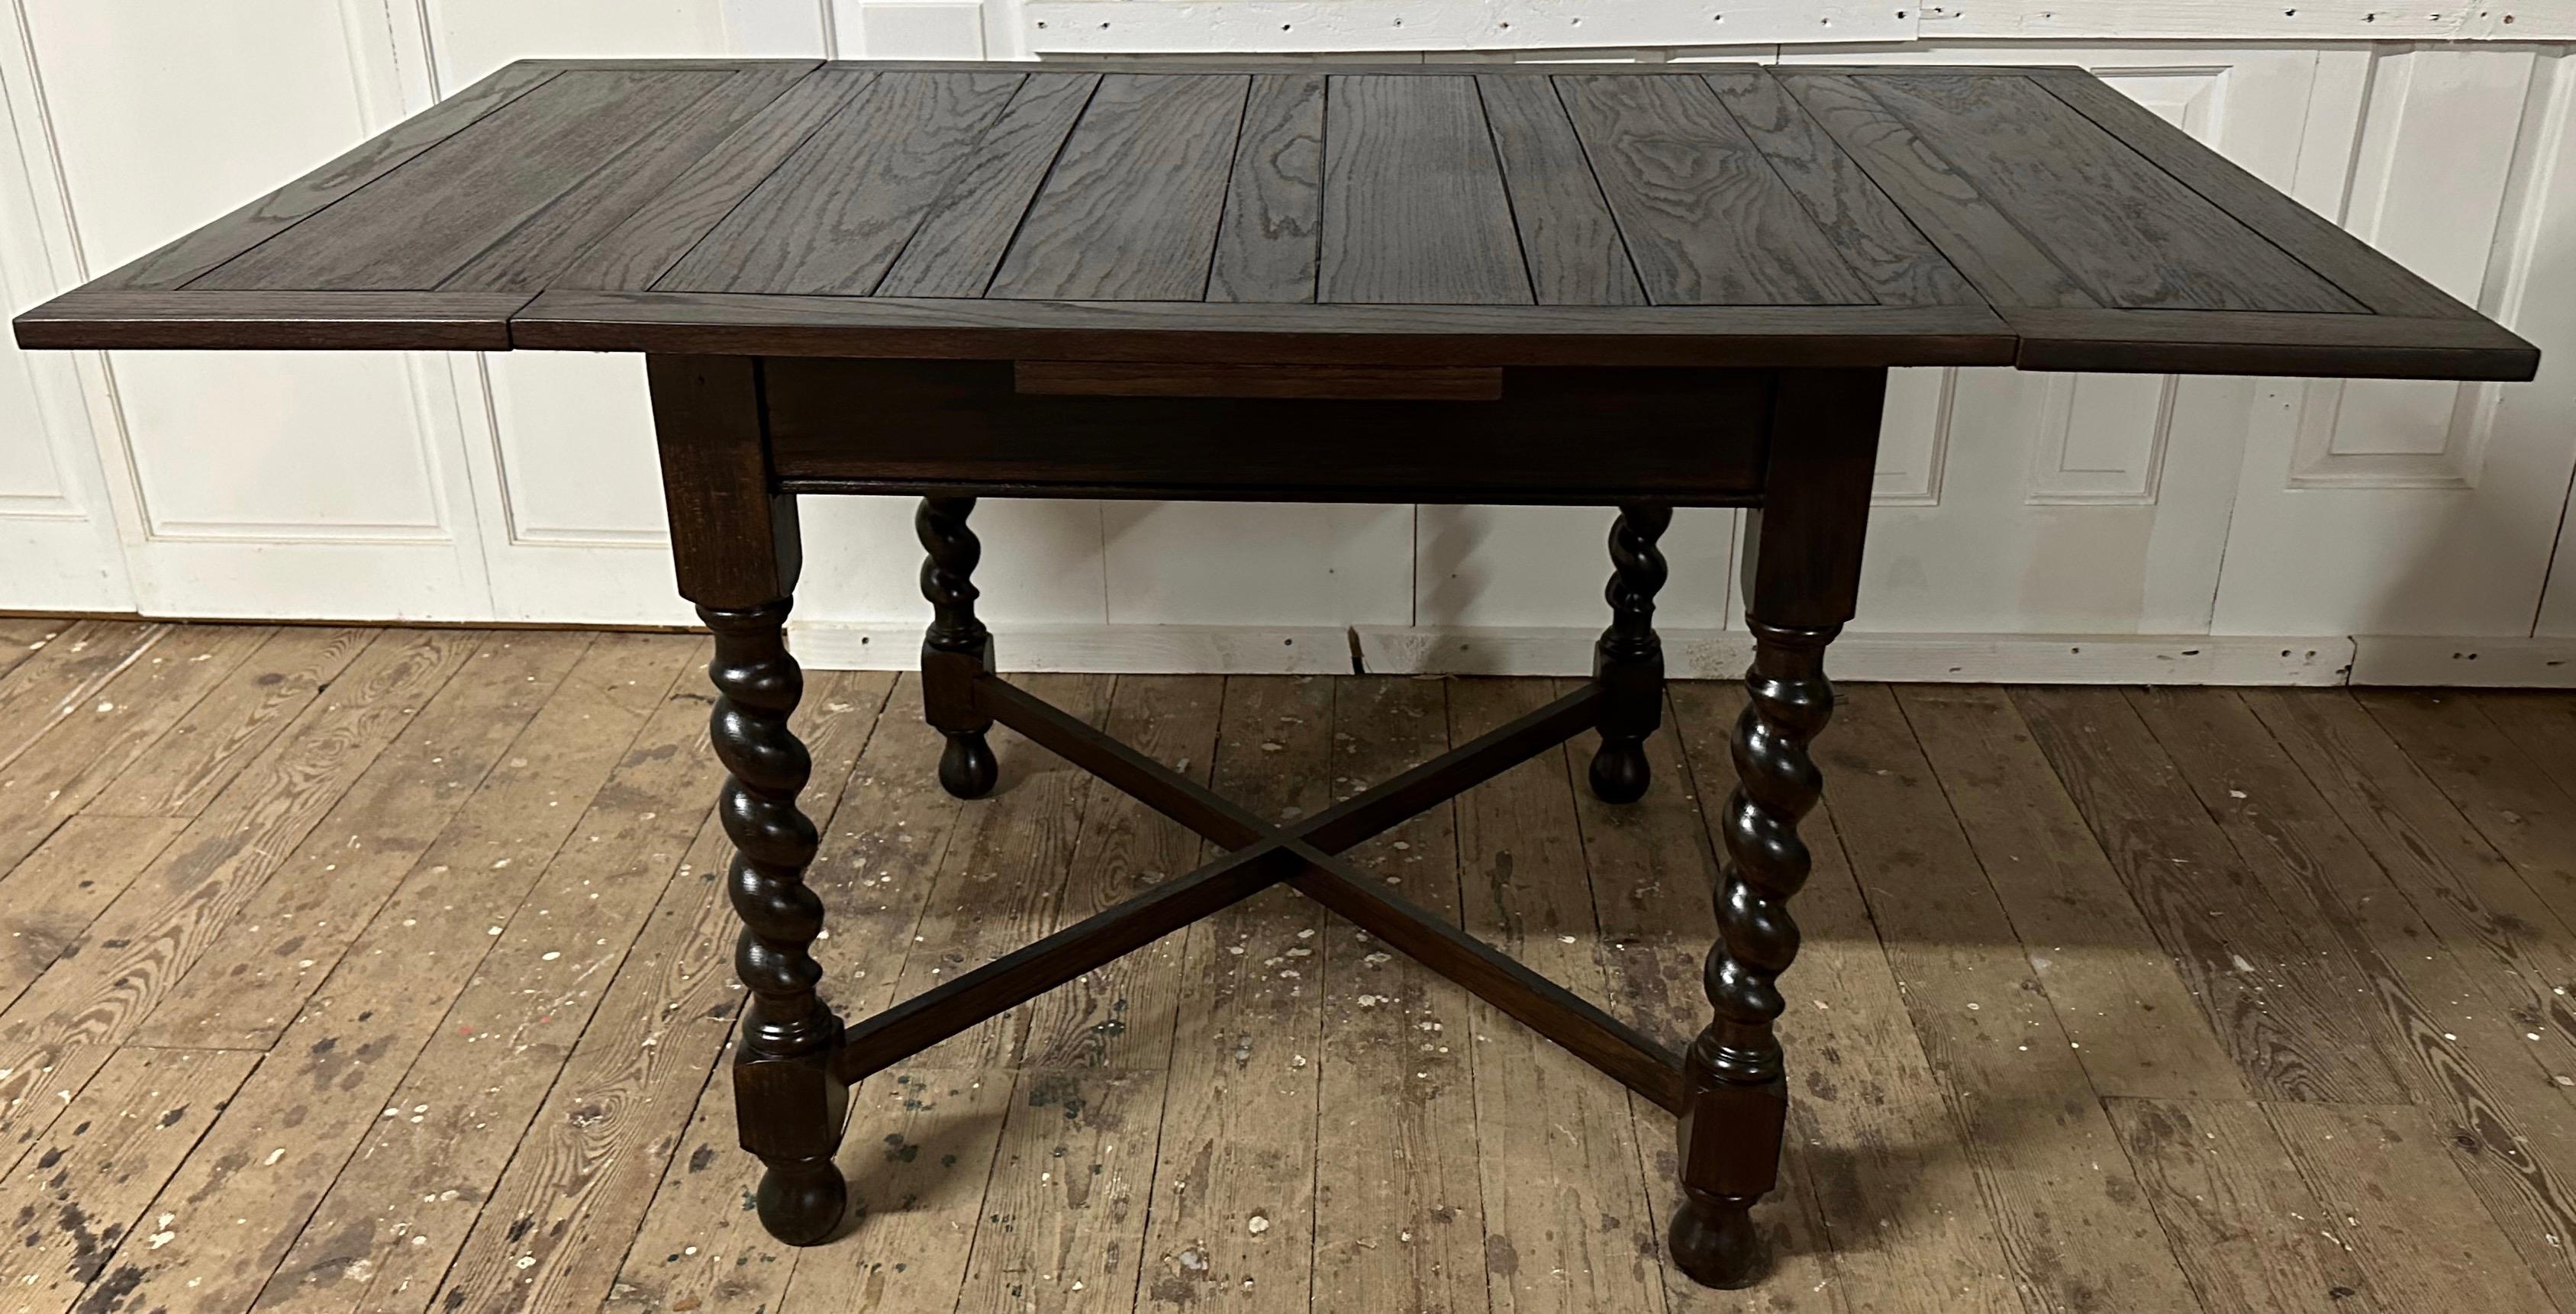 Antique French Louis XIII Style Draw Leaf Dining Table with Barley Twist Legs For Sale 5